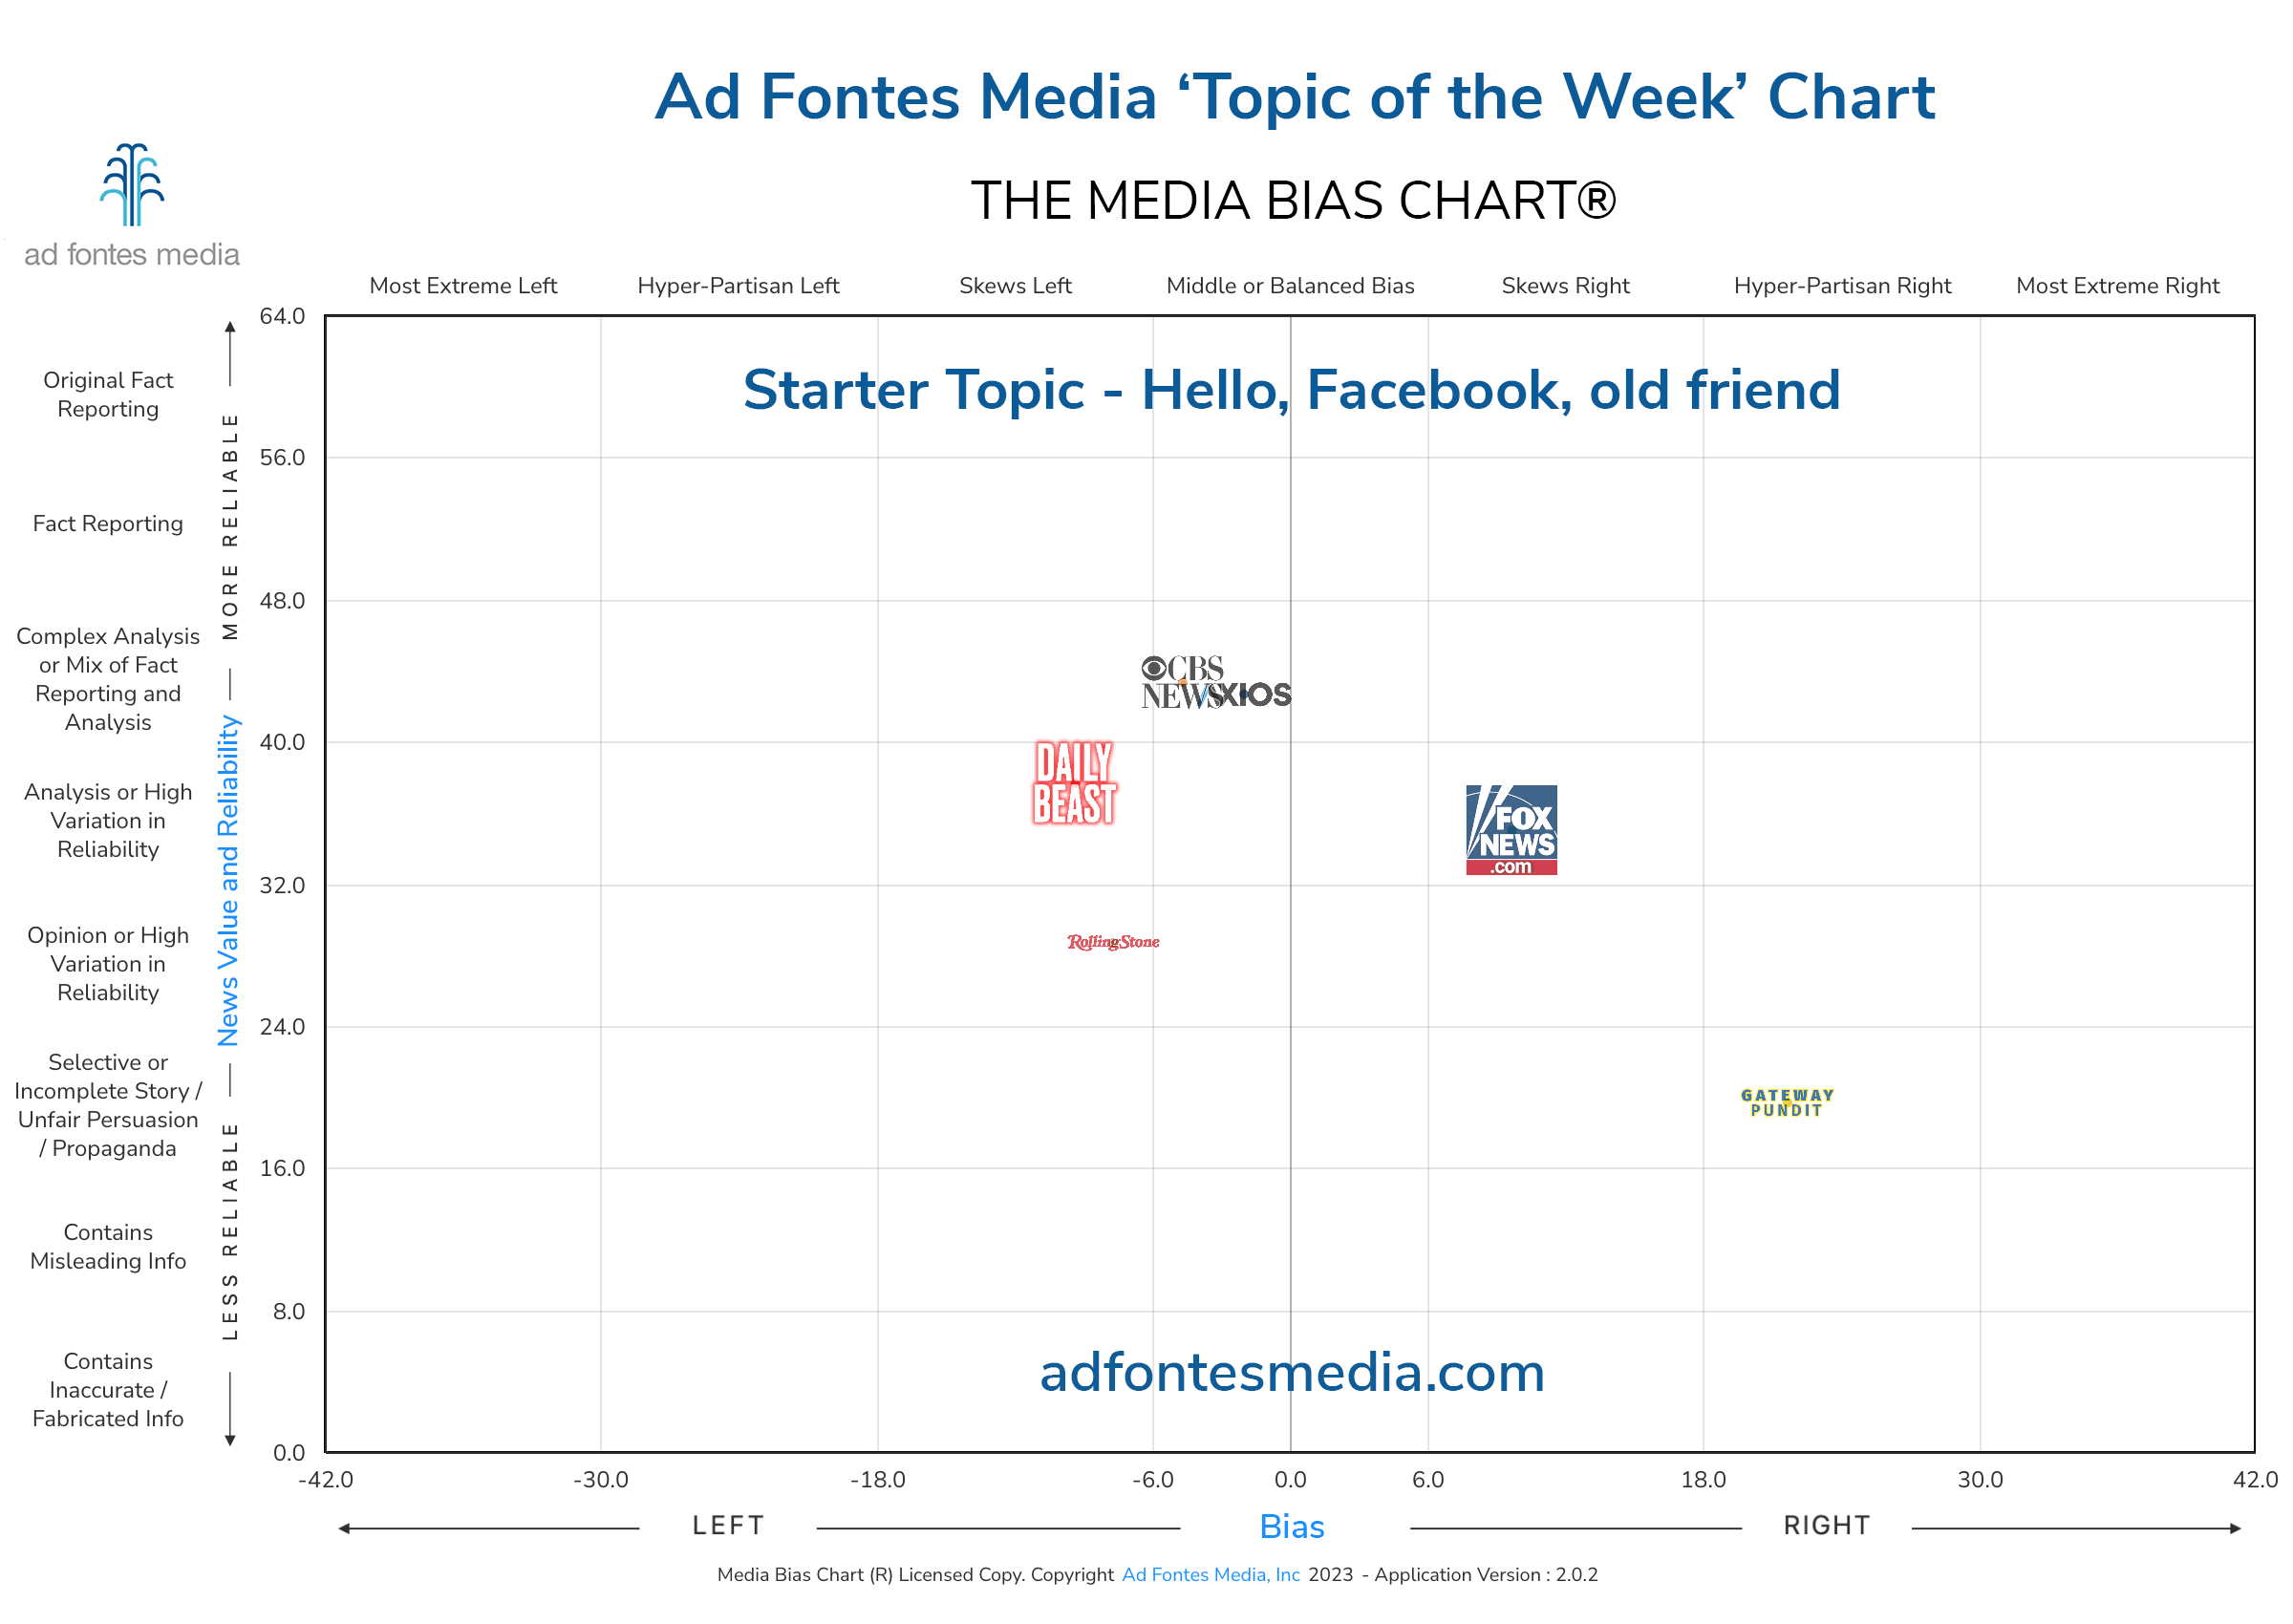 Scores of the Hello, Facebook, old friend articles on the chart